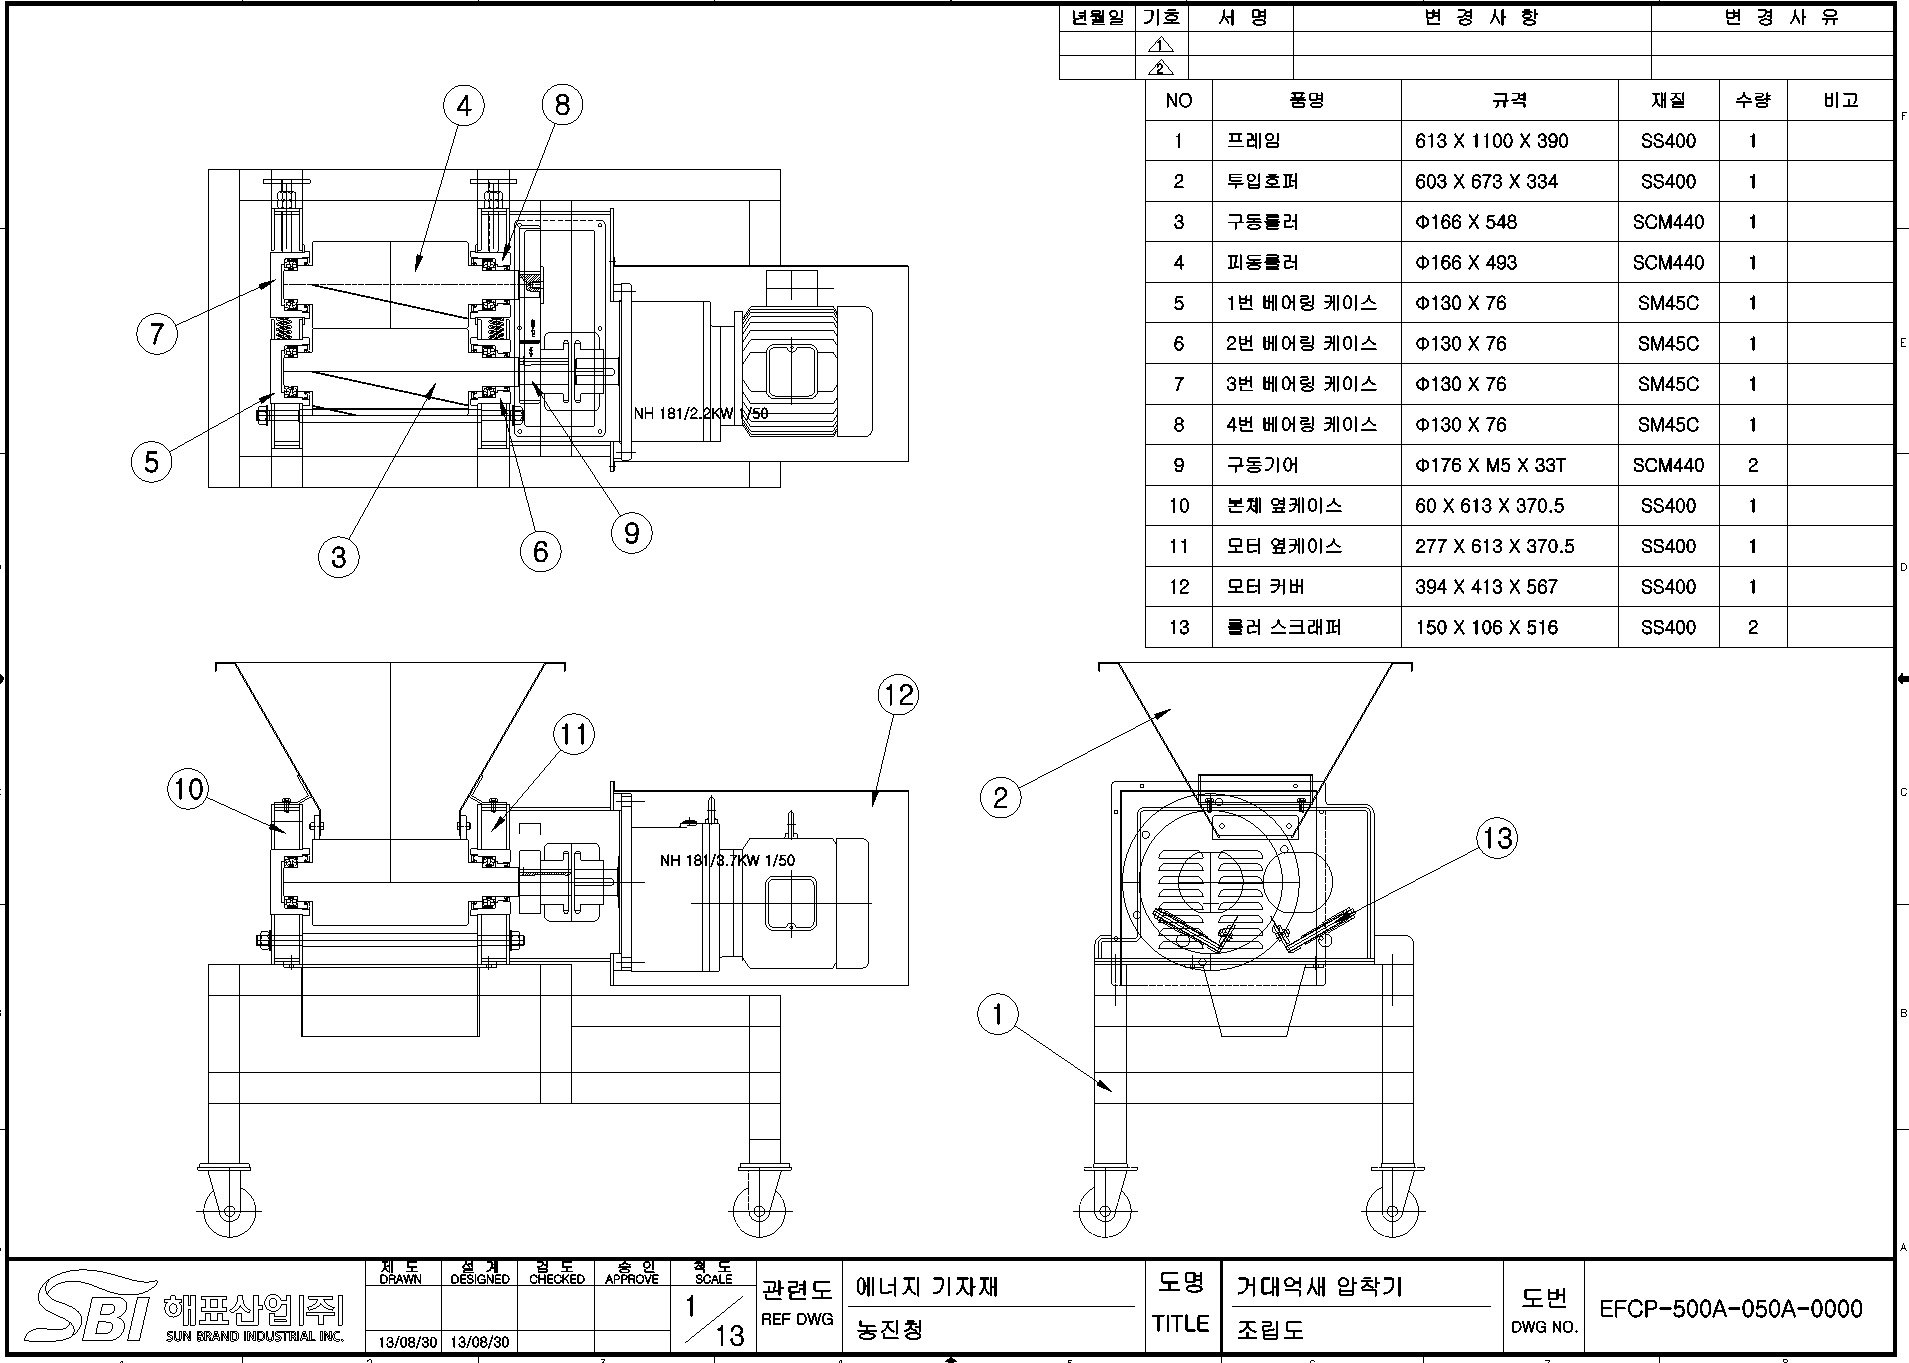 CAD for the first prototype of biomass compressor